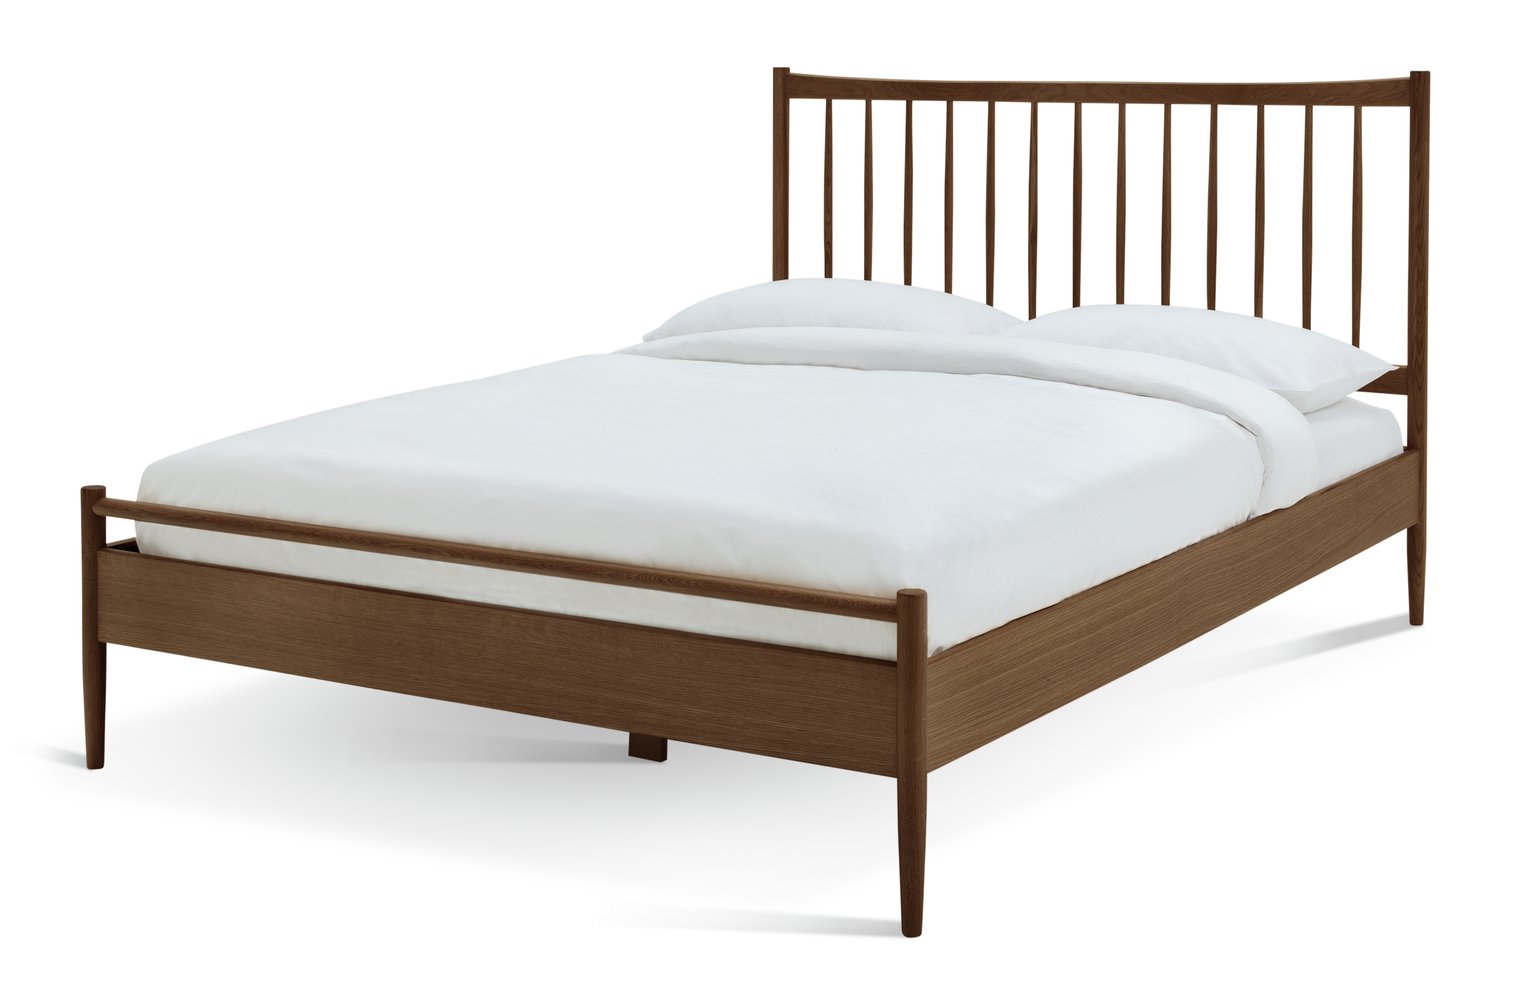 Habitat Chiltern Spindle Double Wooden Bed Frame - Walnut